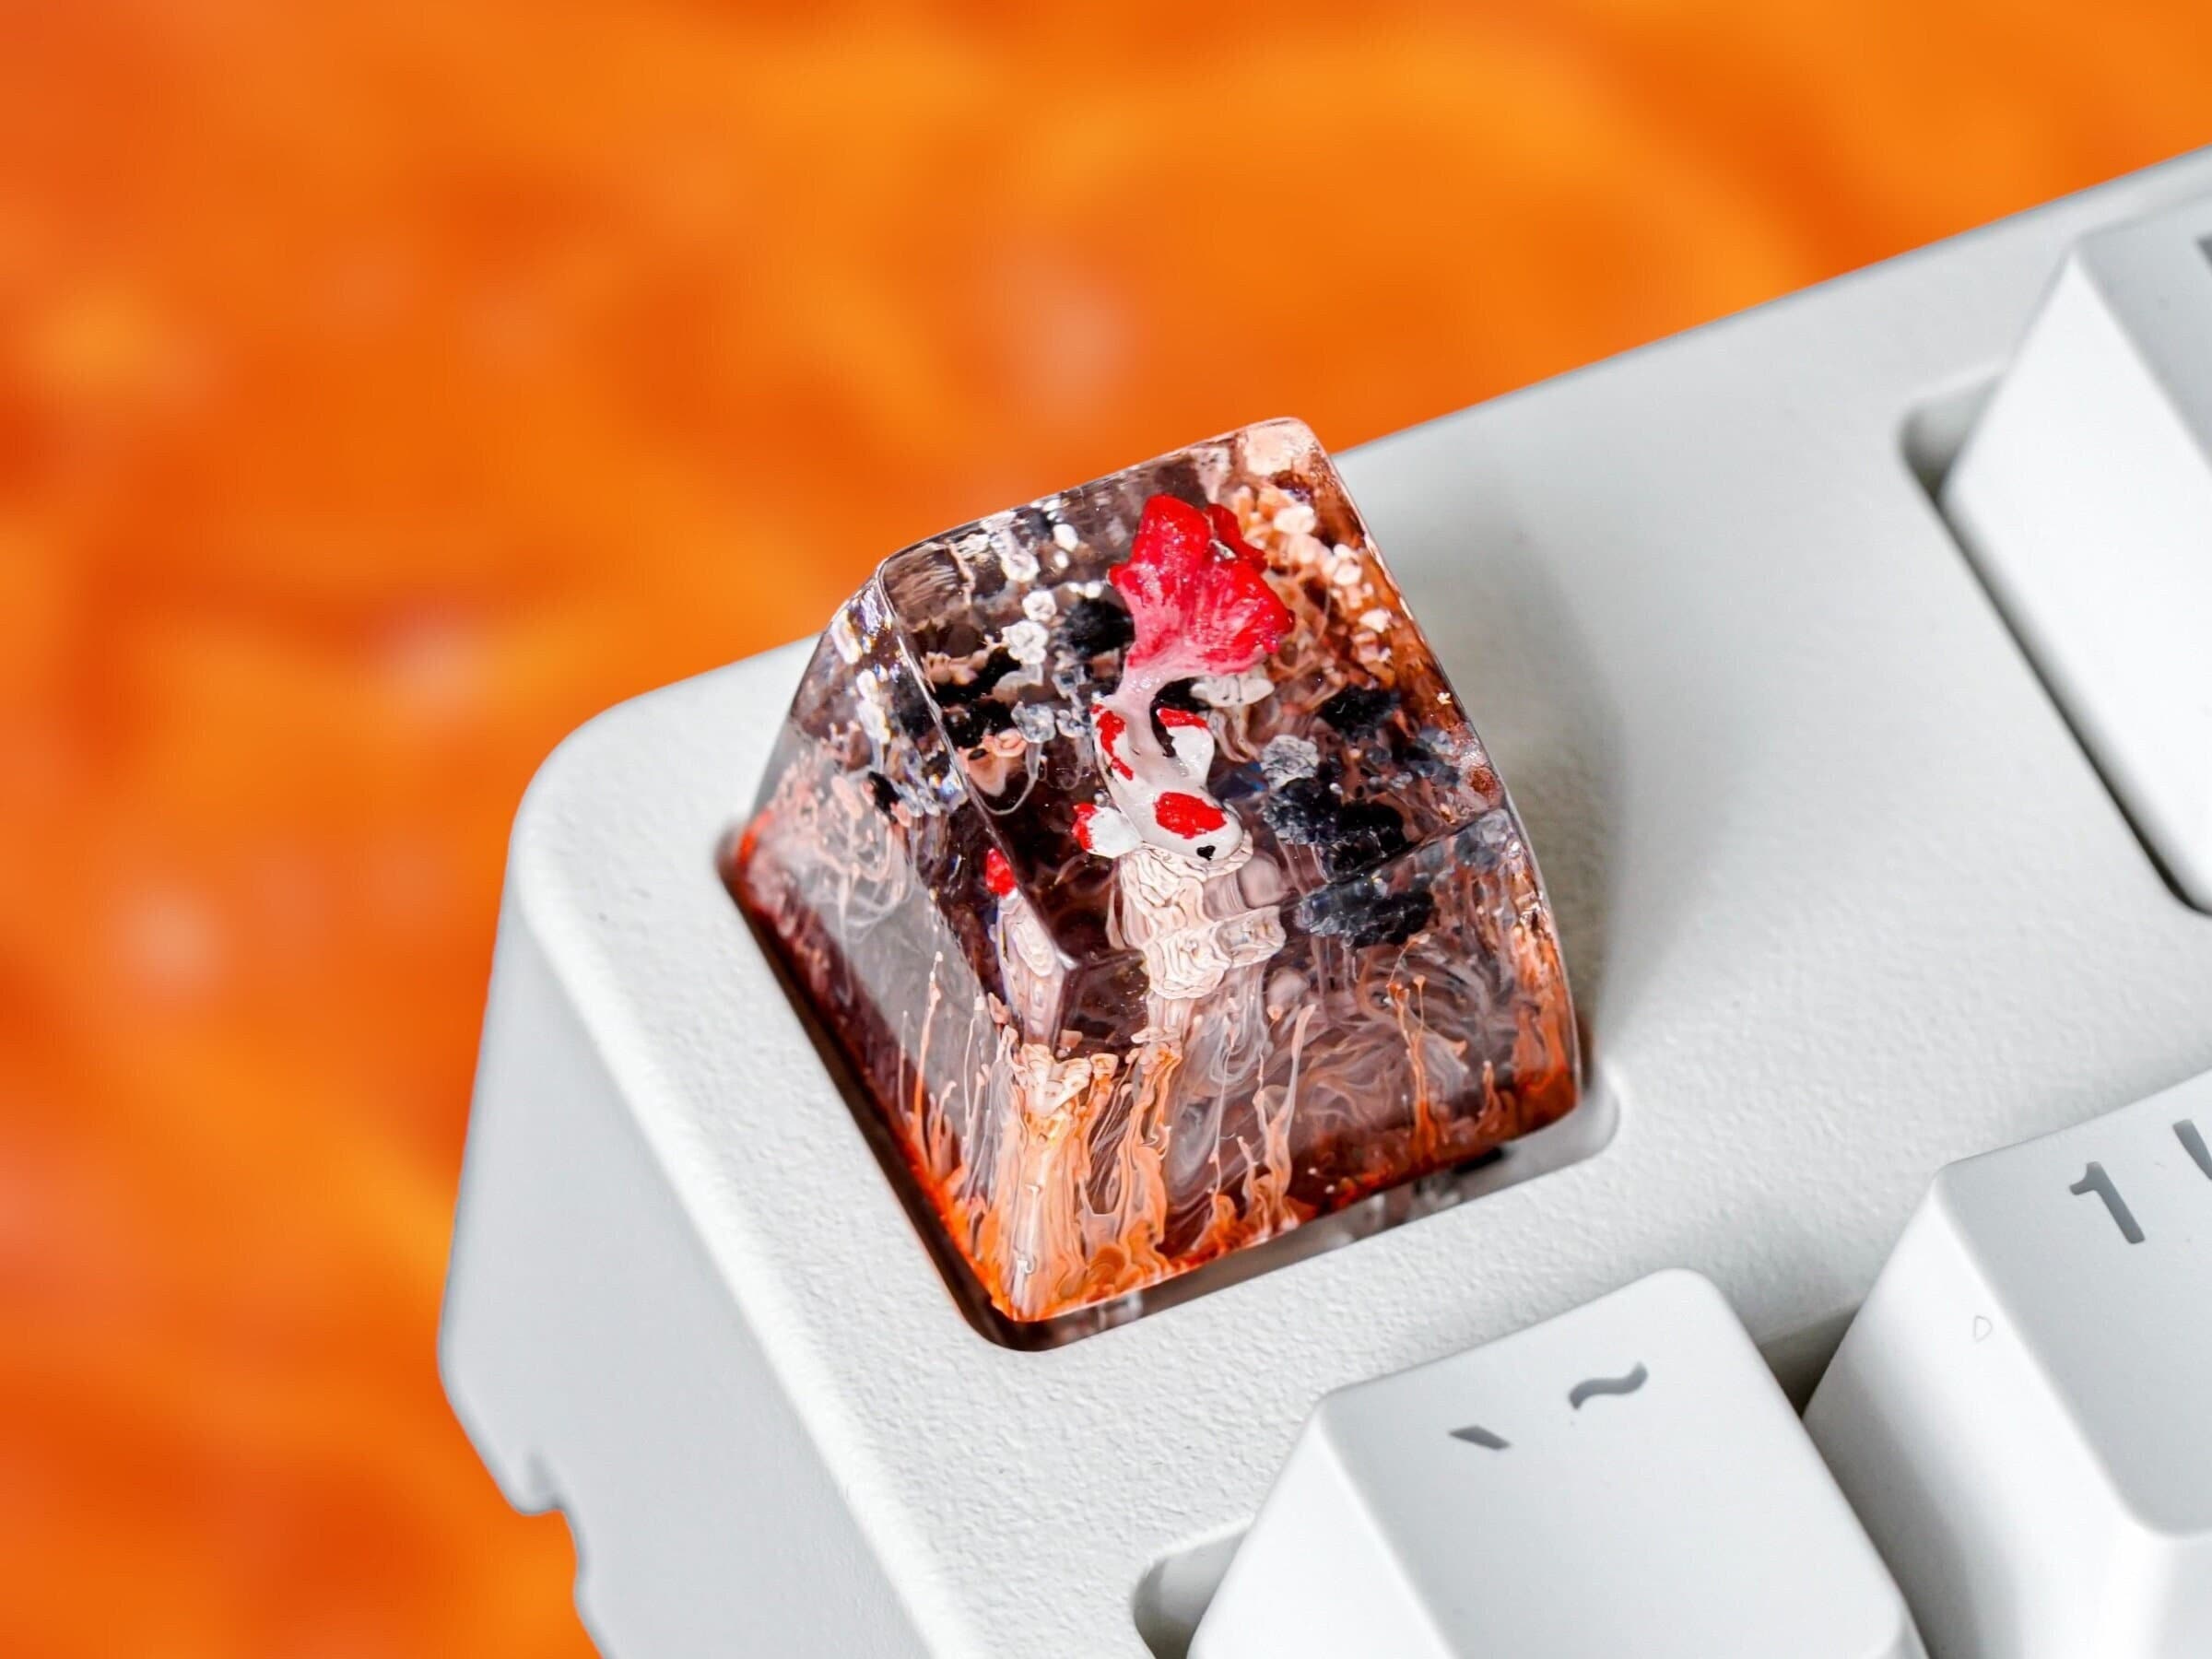 White Red Fish Keycap, Artisan Keycap, Resin Keycap, Keycap for MX Cherry Switches Keyboard, Gift for Him